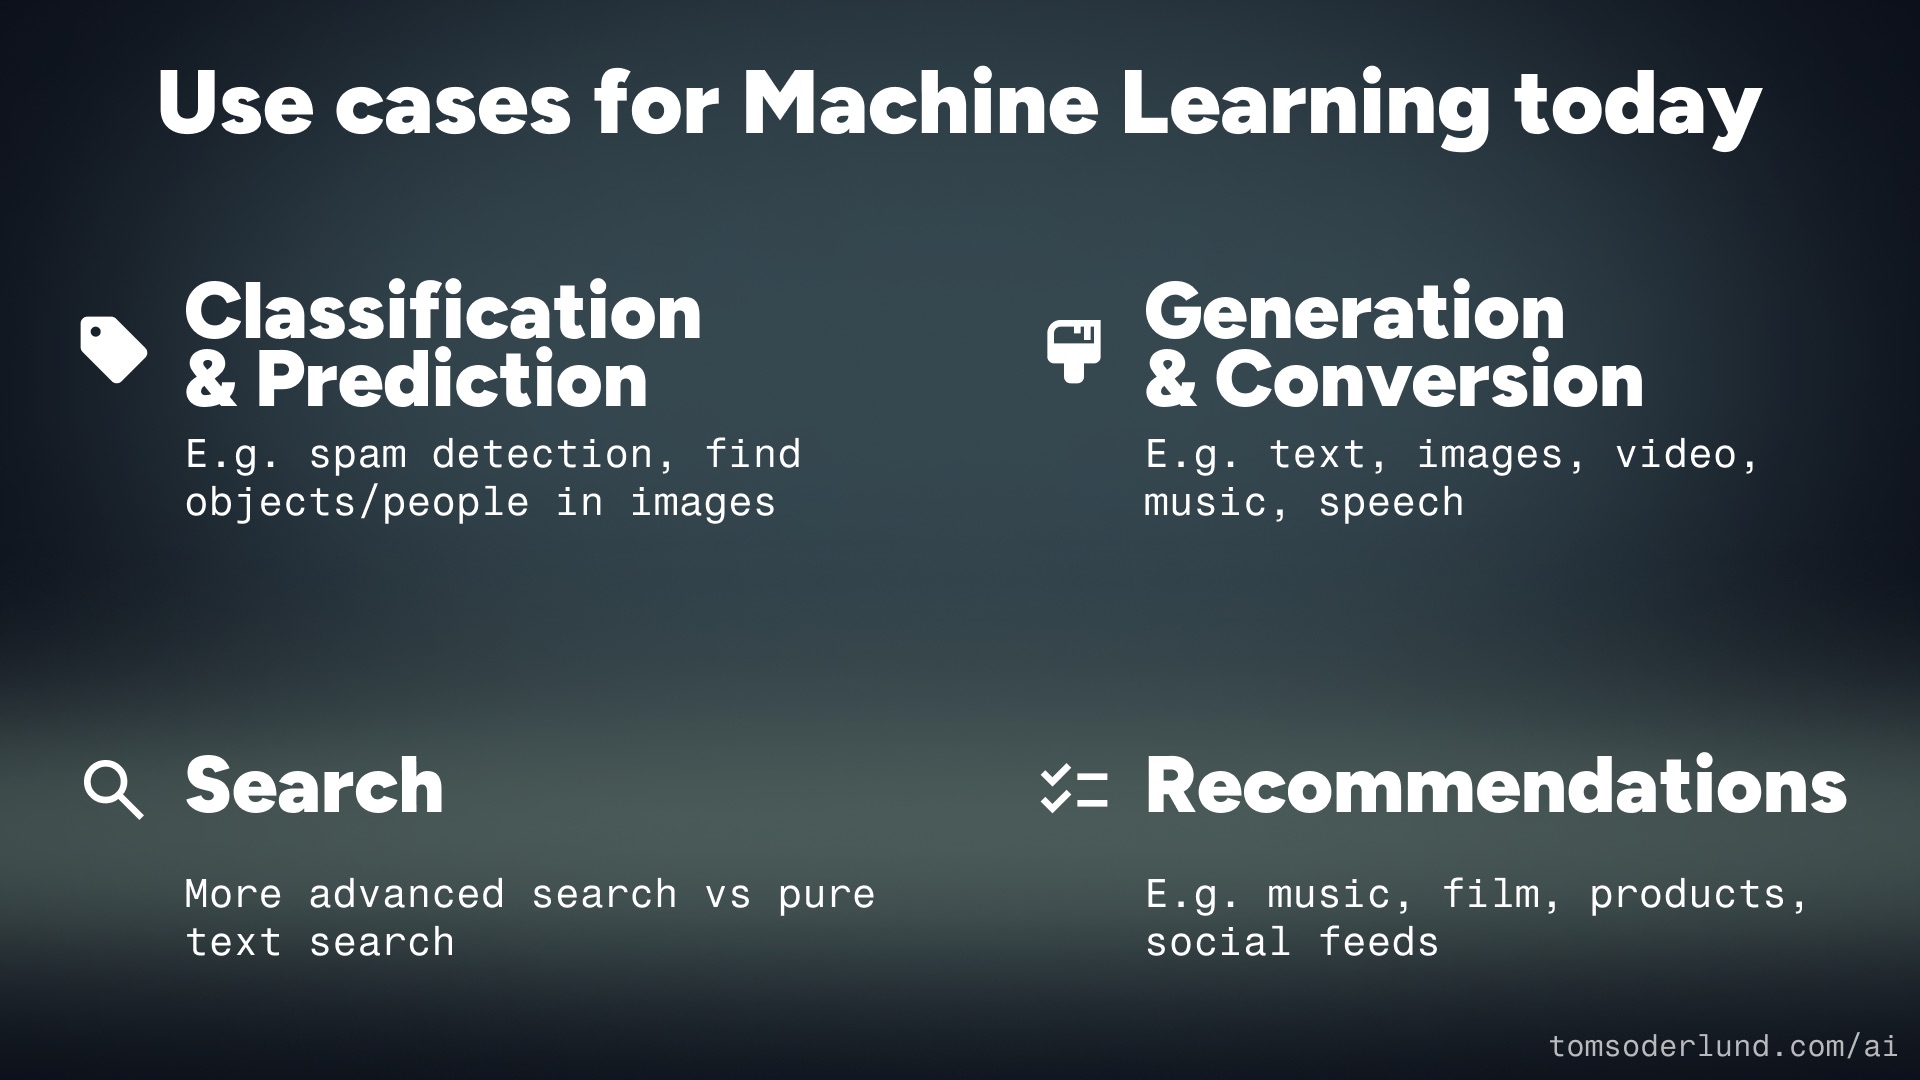 Use cases for AI/ML